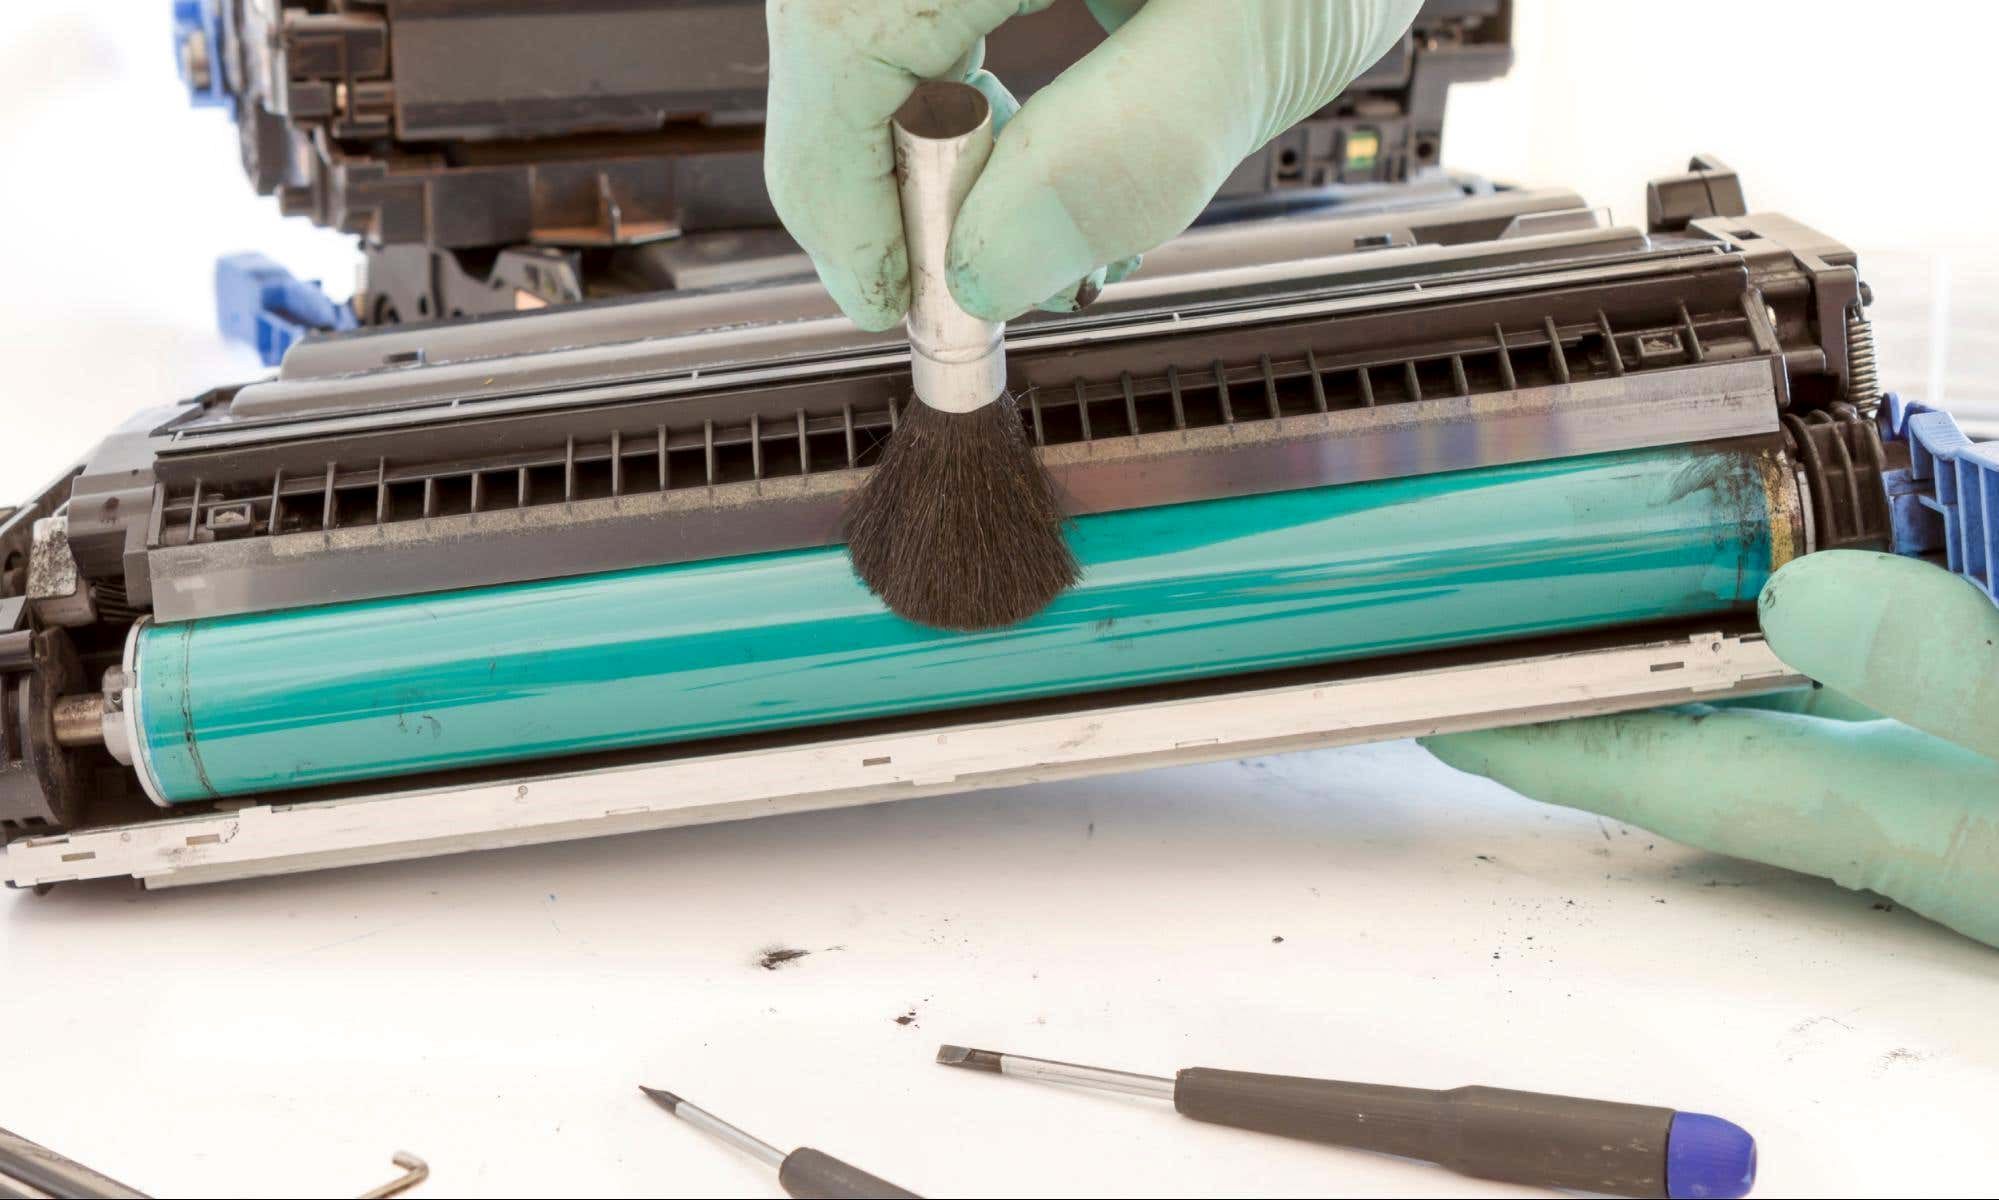 How To Clean A Brother Laser Printer